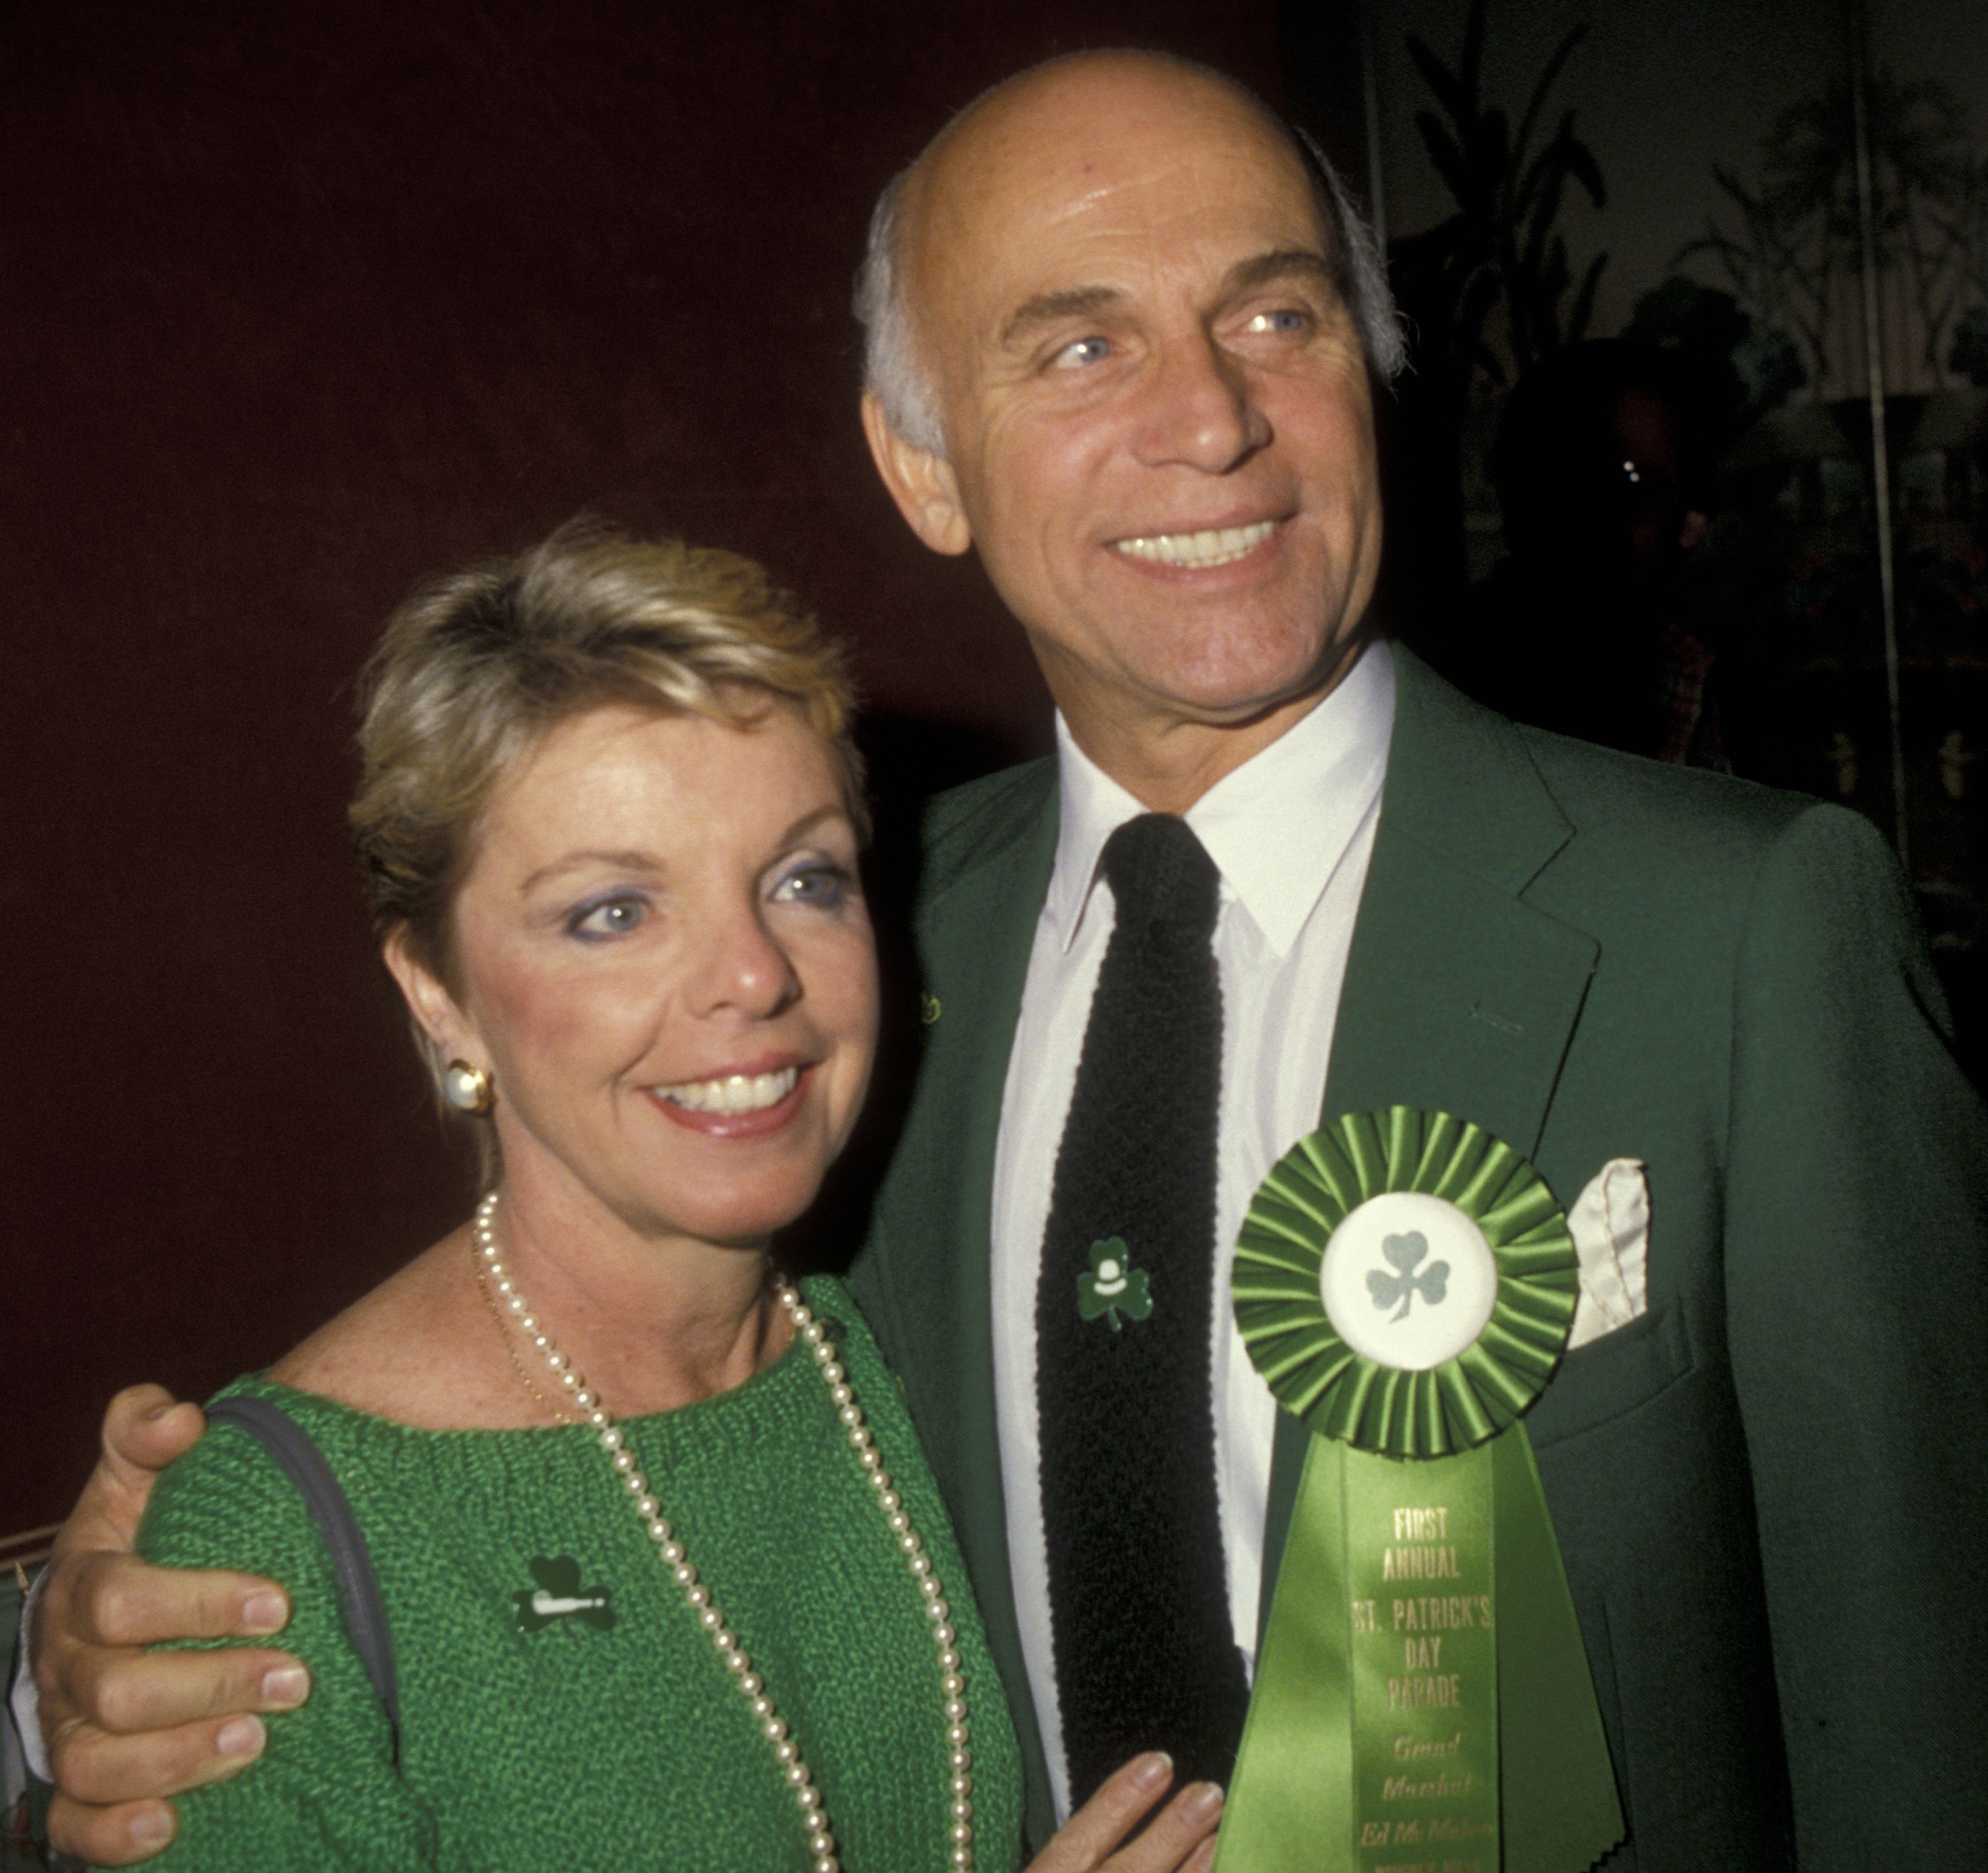 Gavin MacLeod from 'Love Boat' on Finding God the Morning of His Mom's